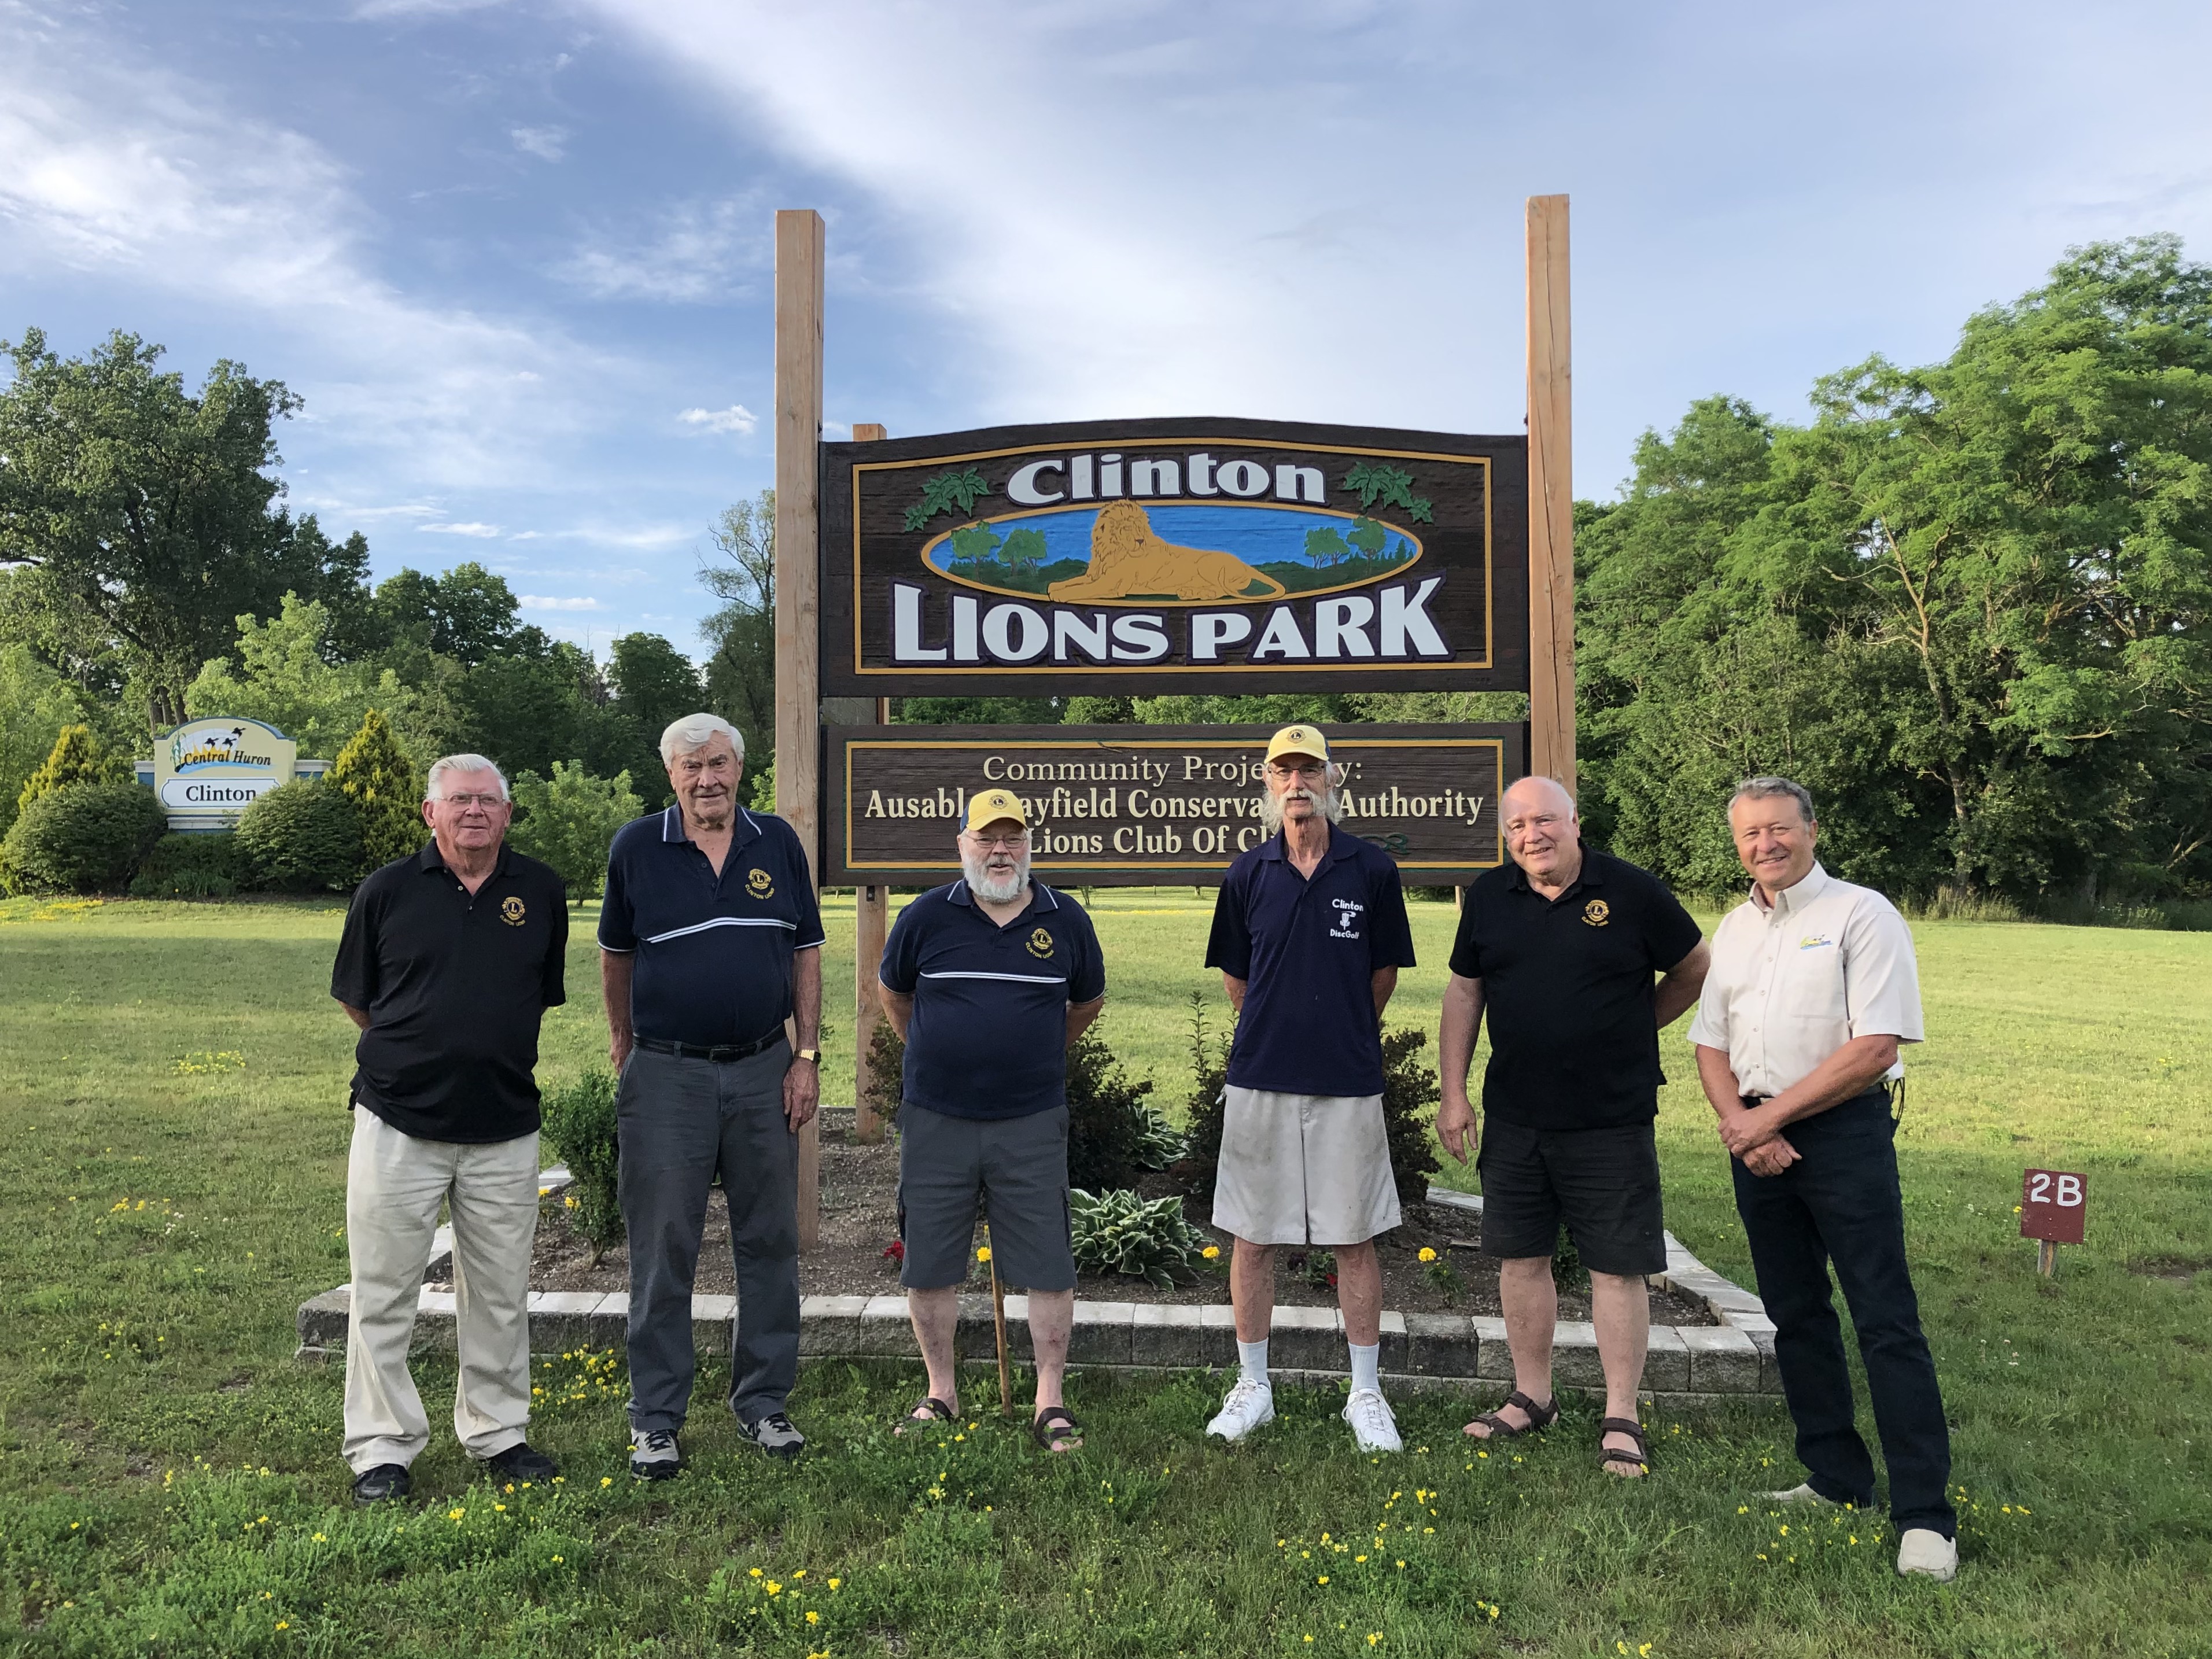 clinton lions club folding after 85 years